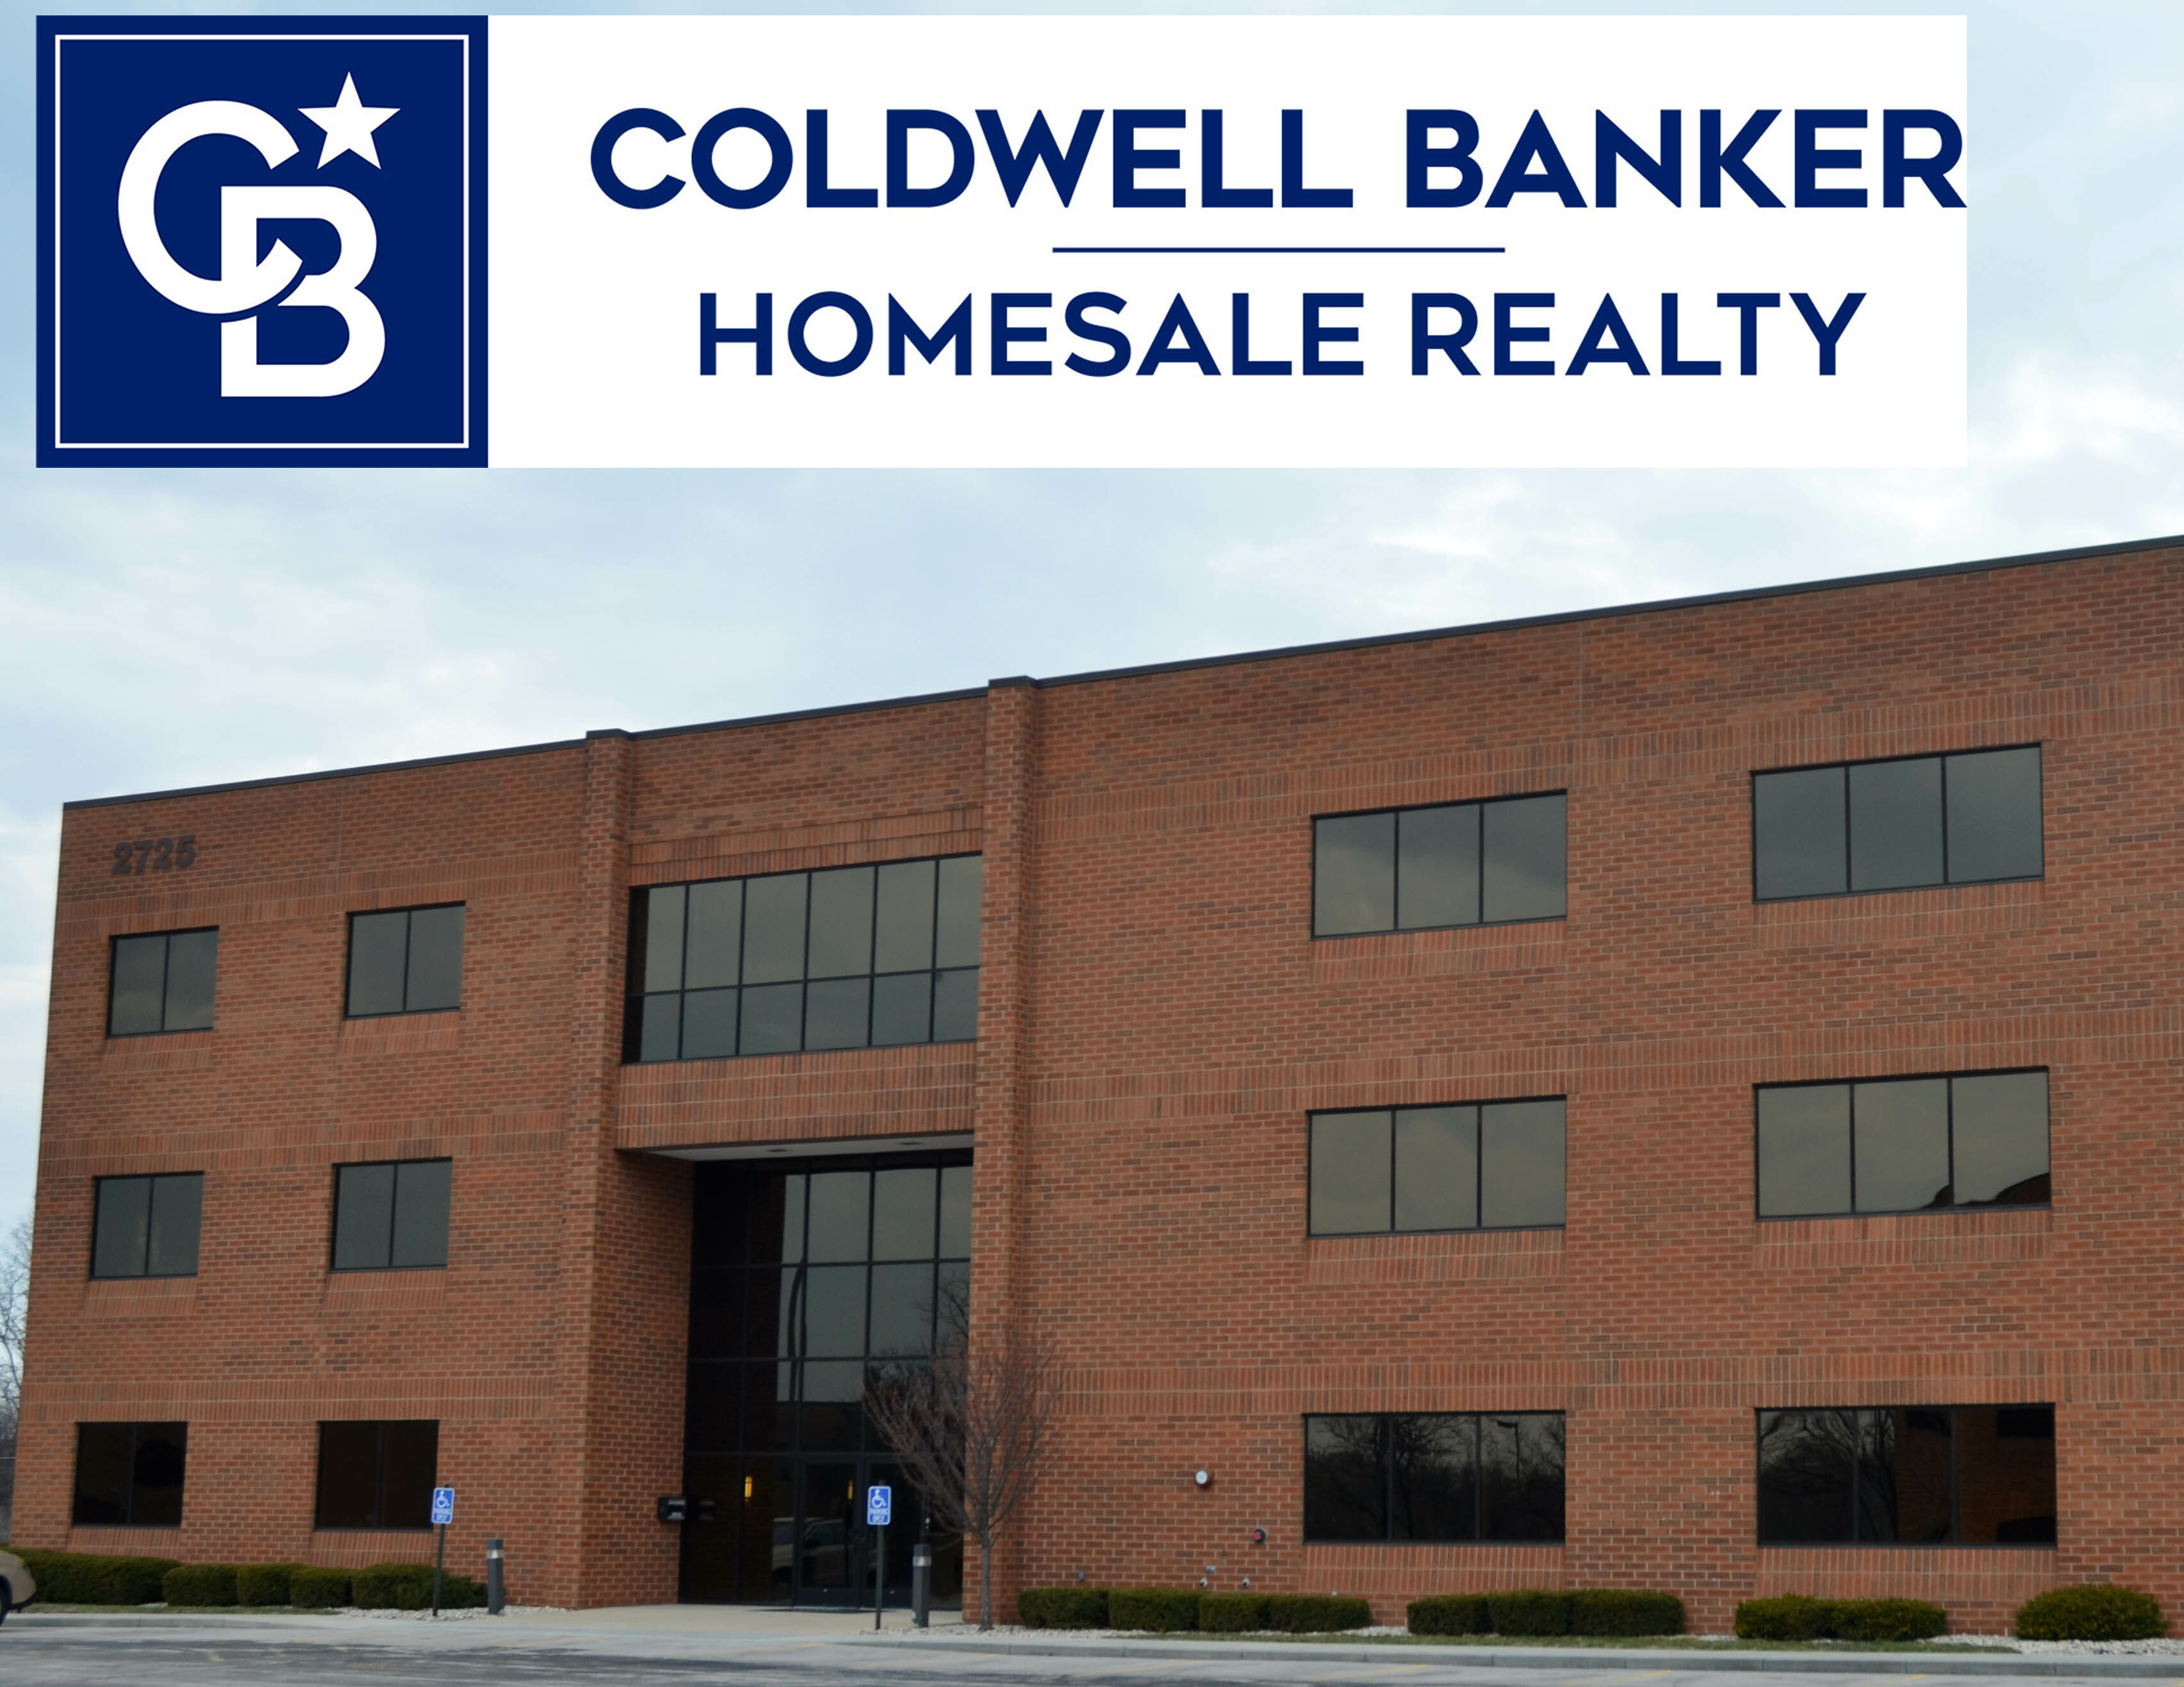 Coldwell Banker - New Berlin,New Berlin,Homesale Realty